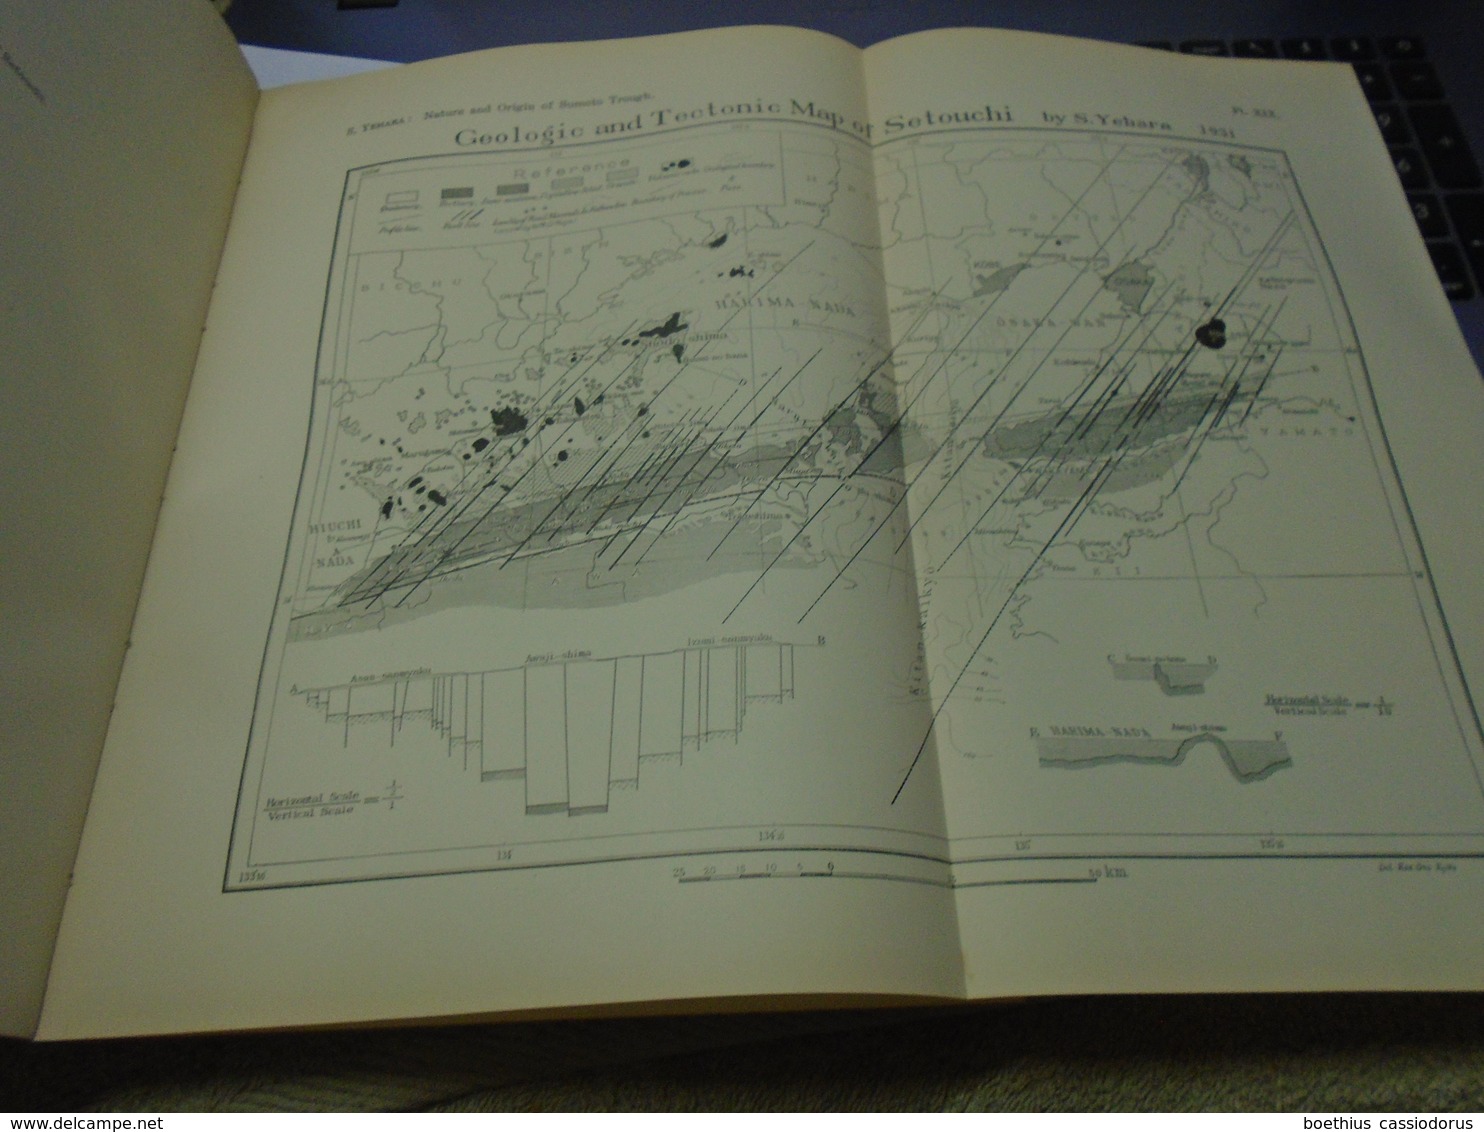 JAPANESE JOURNAL OF GEOLOGY AND GEOGRAPHY Transactions And Abstracts Vol. IX  Nos. 3 And 4 TOKYO March,1932 - Aardwetenschappen